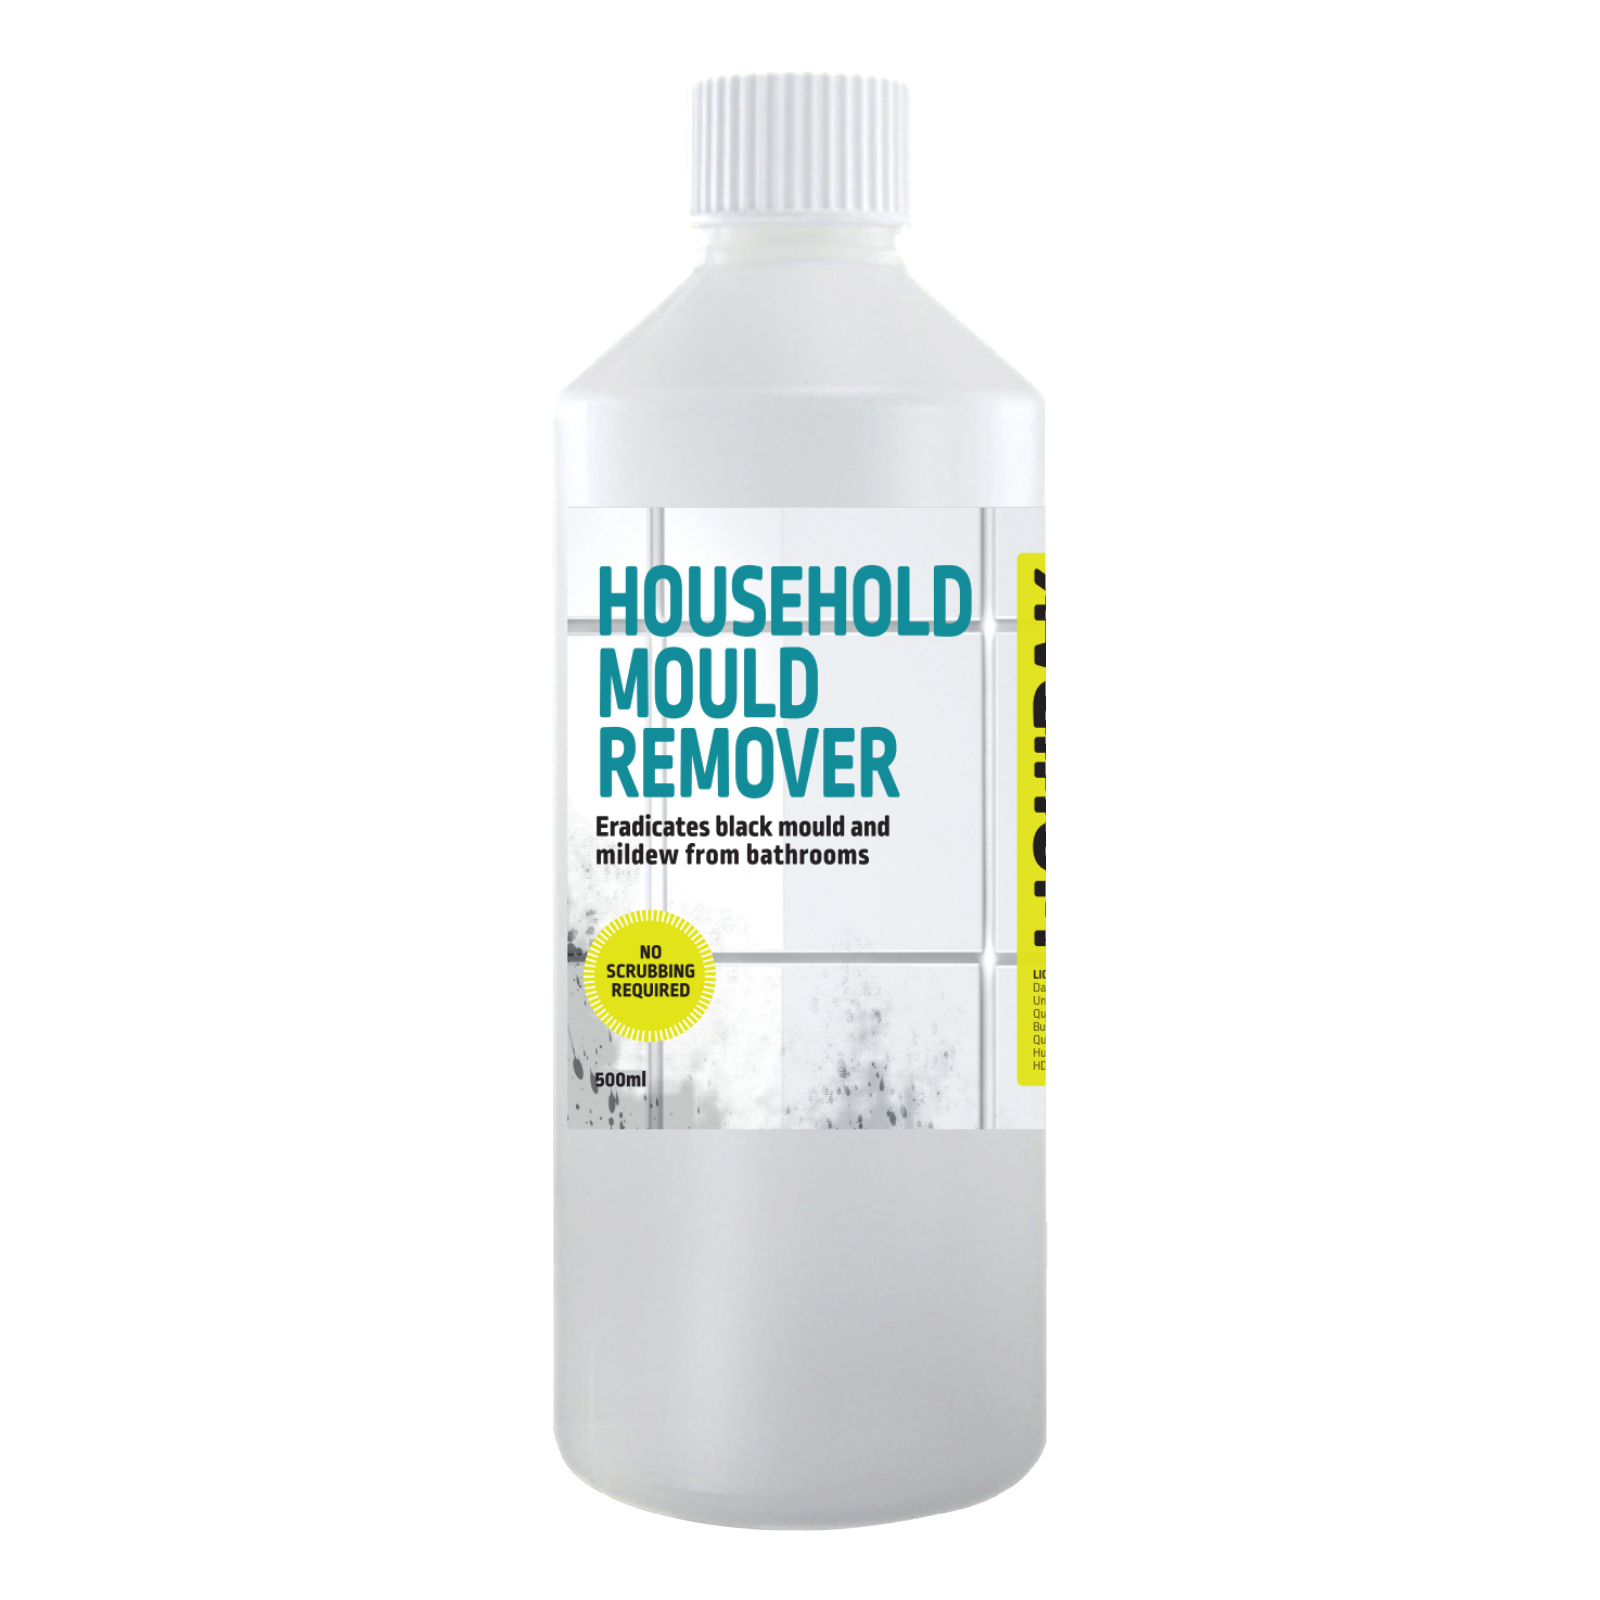 Household Mould Remover